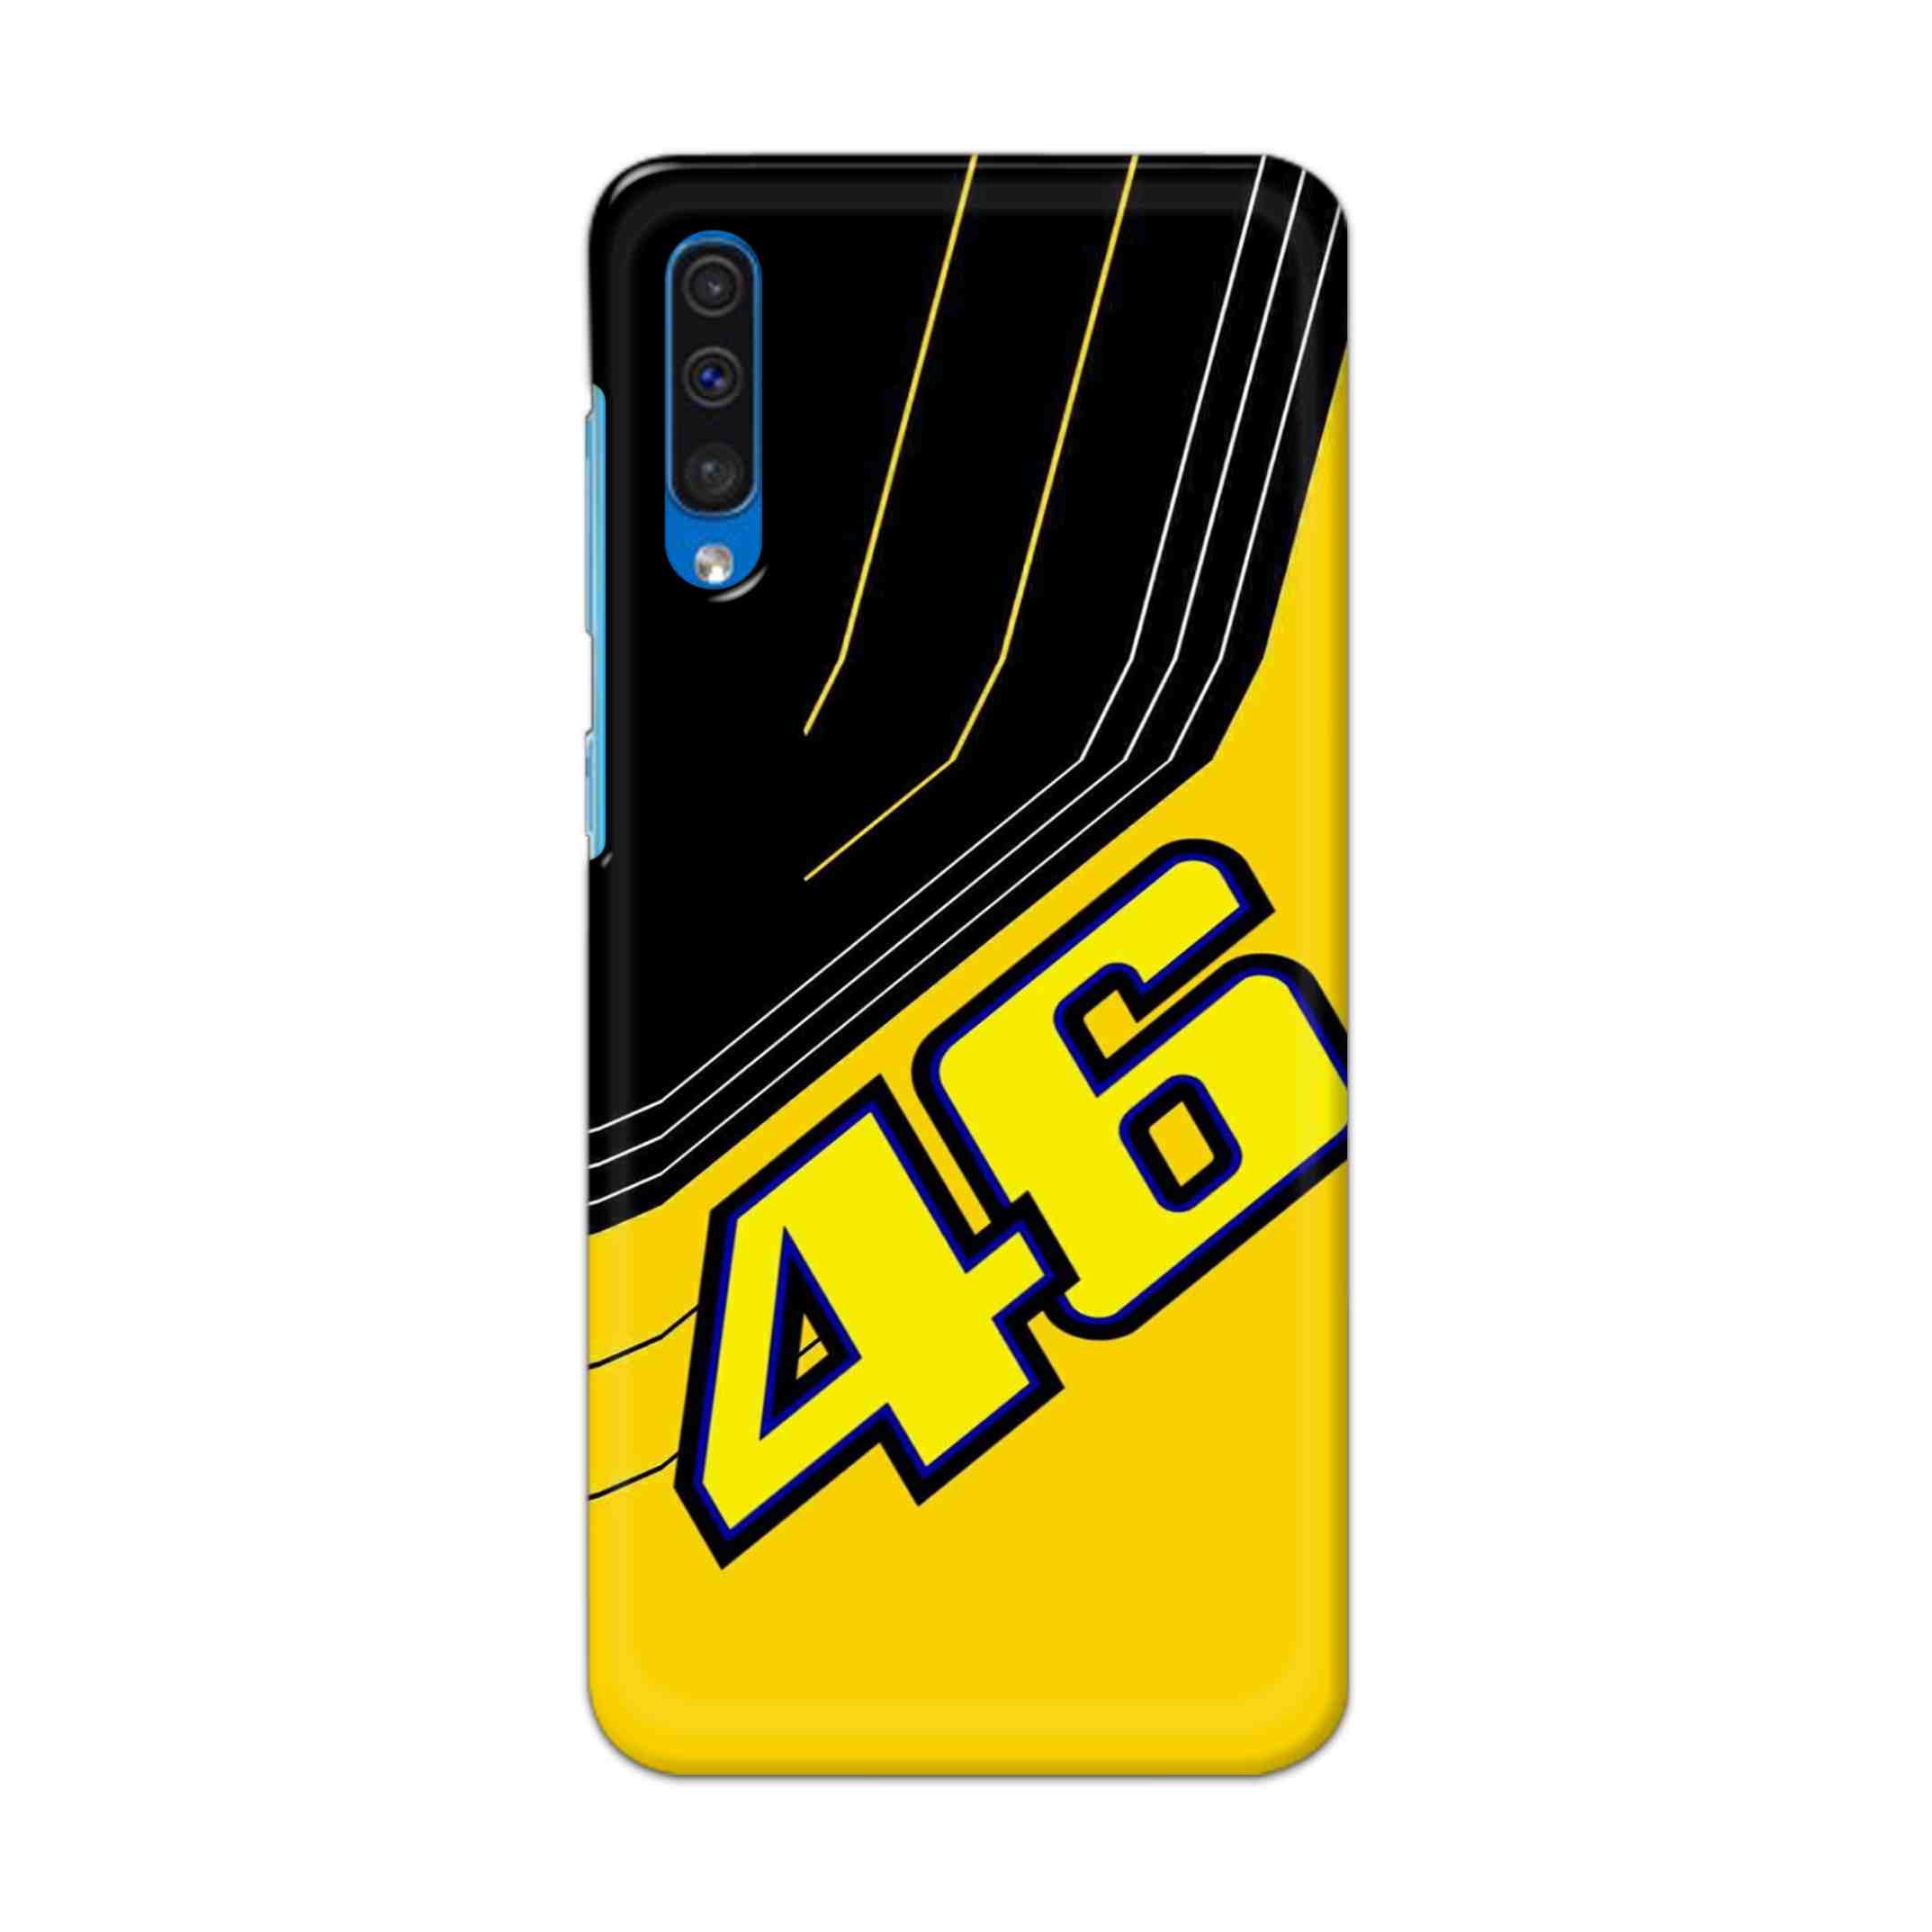 Buy 46 Hard Back Mobile Phone Case Cover For Samsung Galaxy A50 / A50s / A30s Online